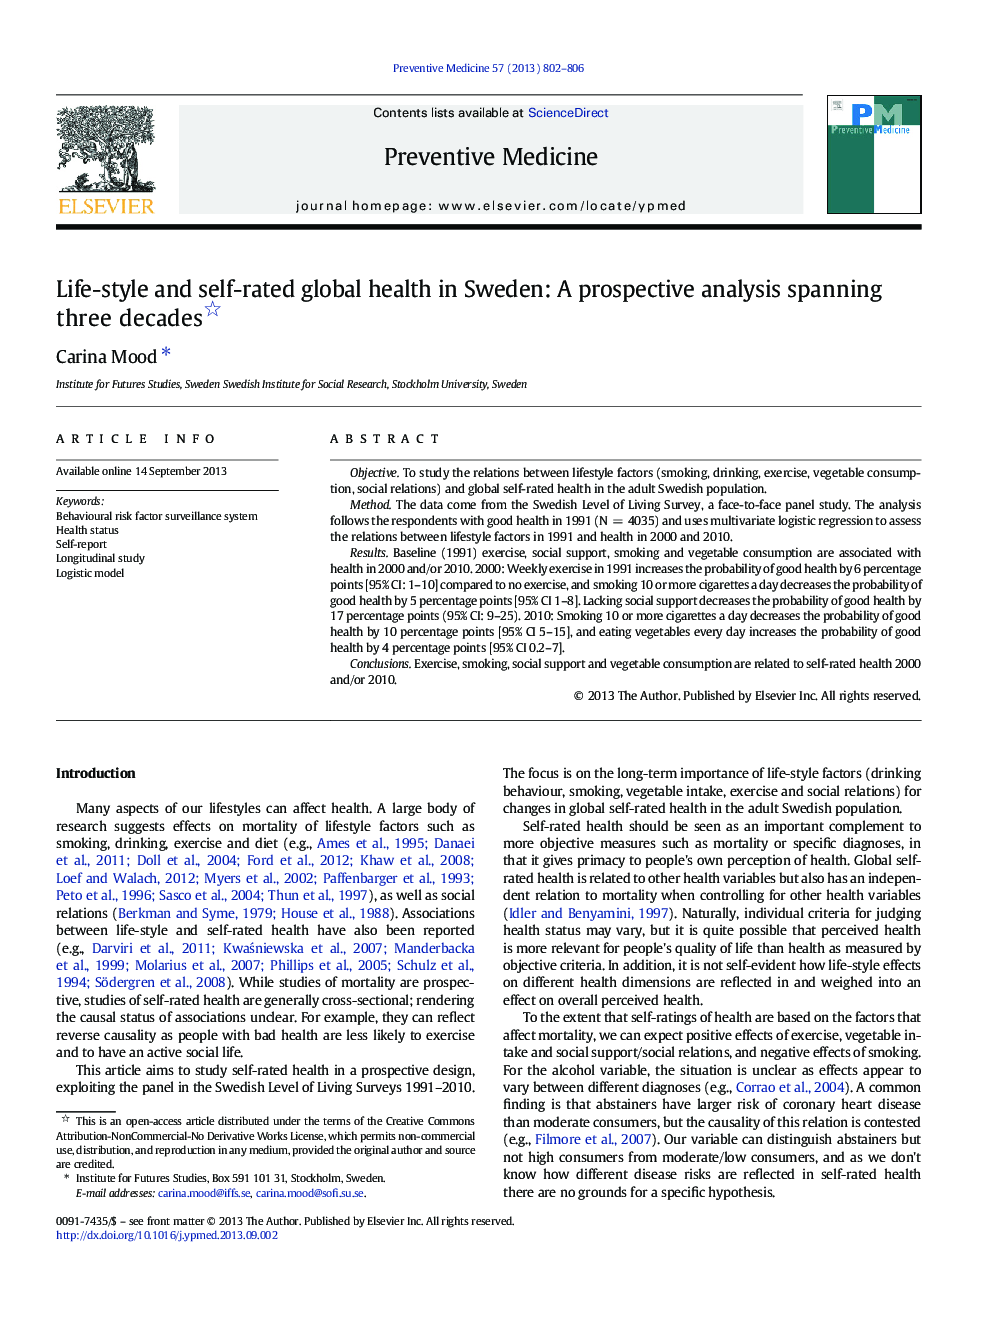 Life-style and self-rated global health in Sweden: A prospective analysis spanning three decades